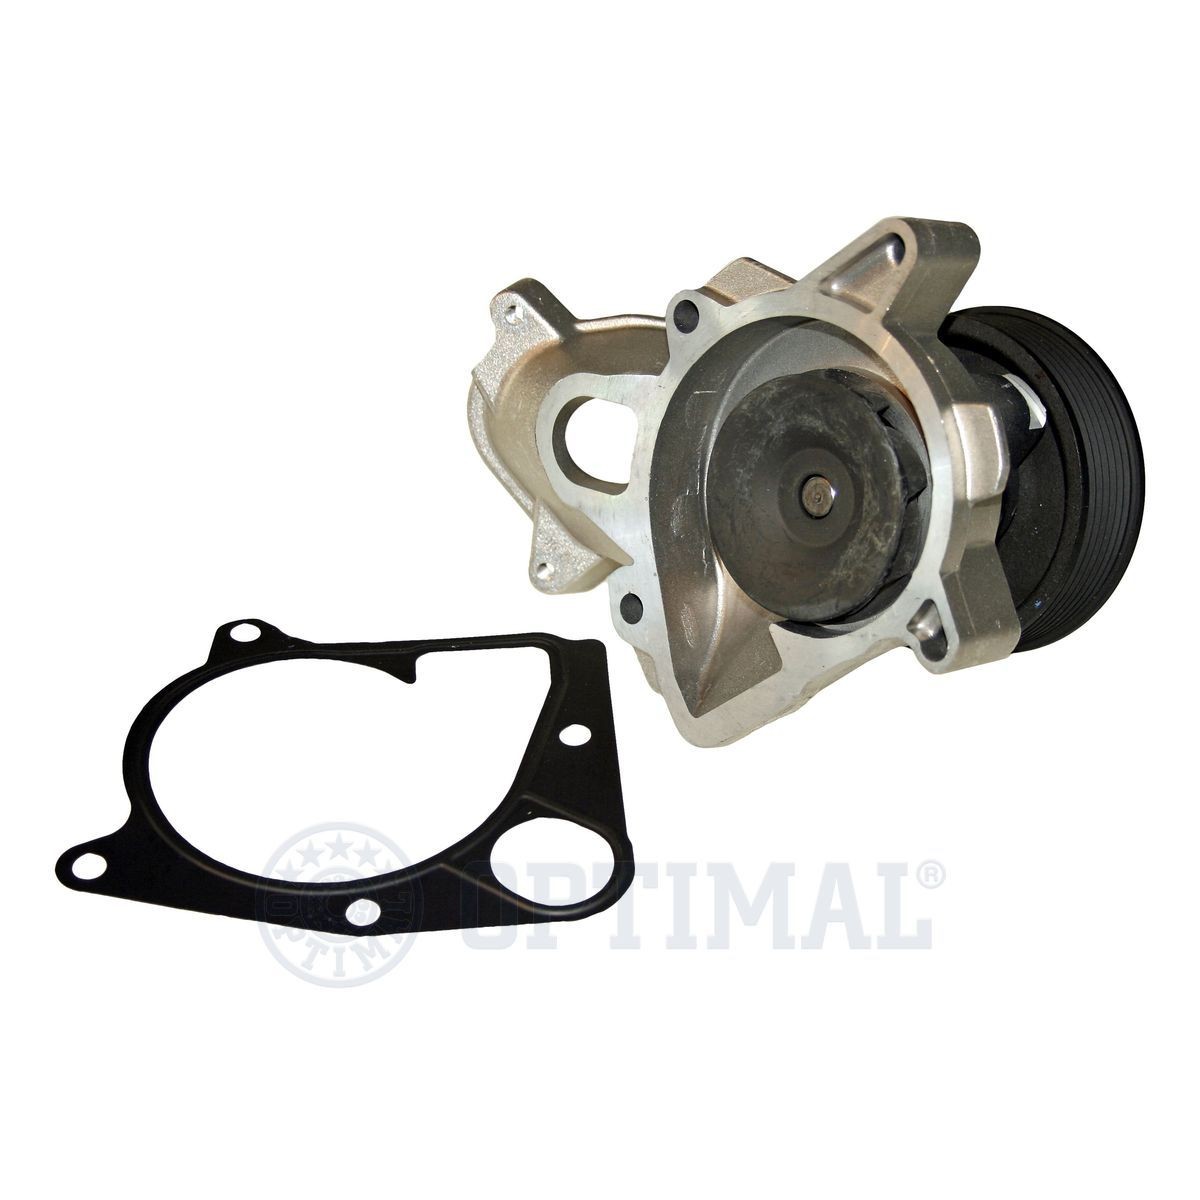 OPTIMAL Water pump for engine AQ-2169